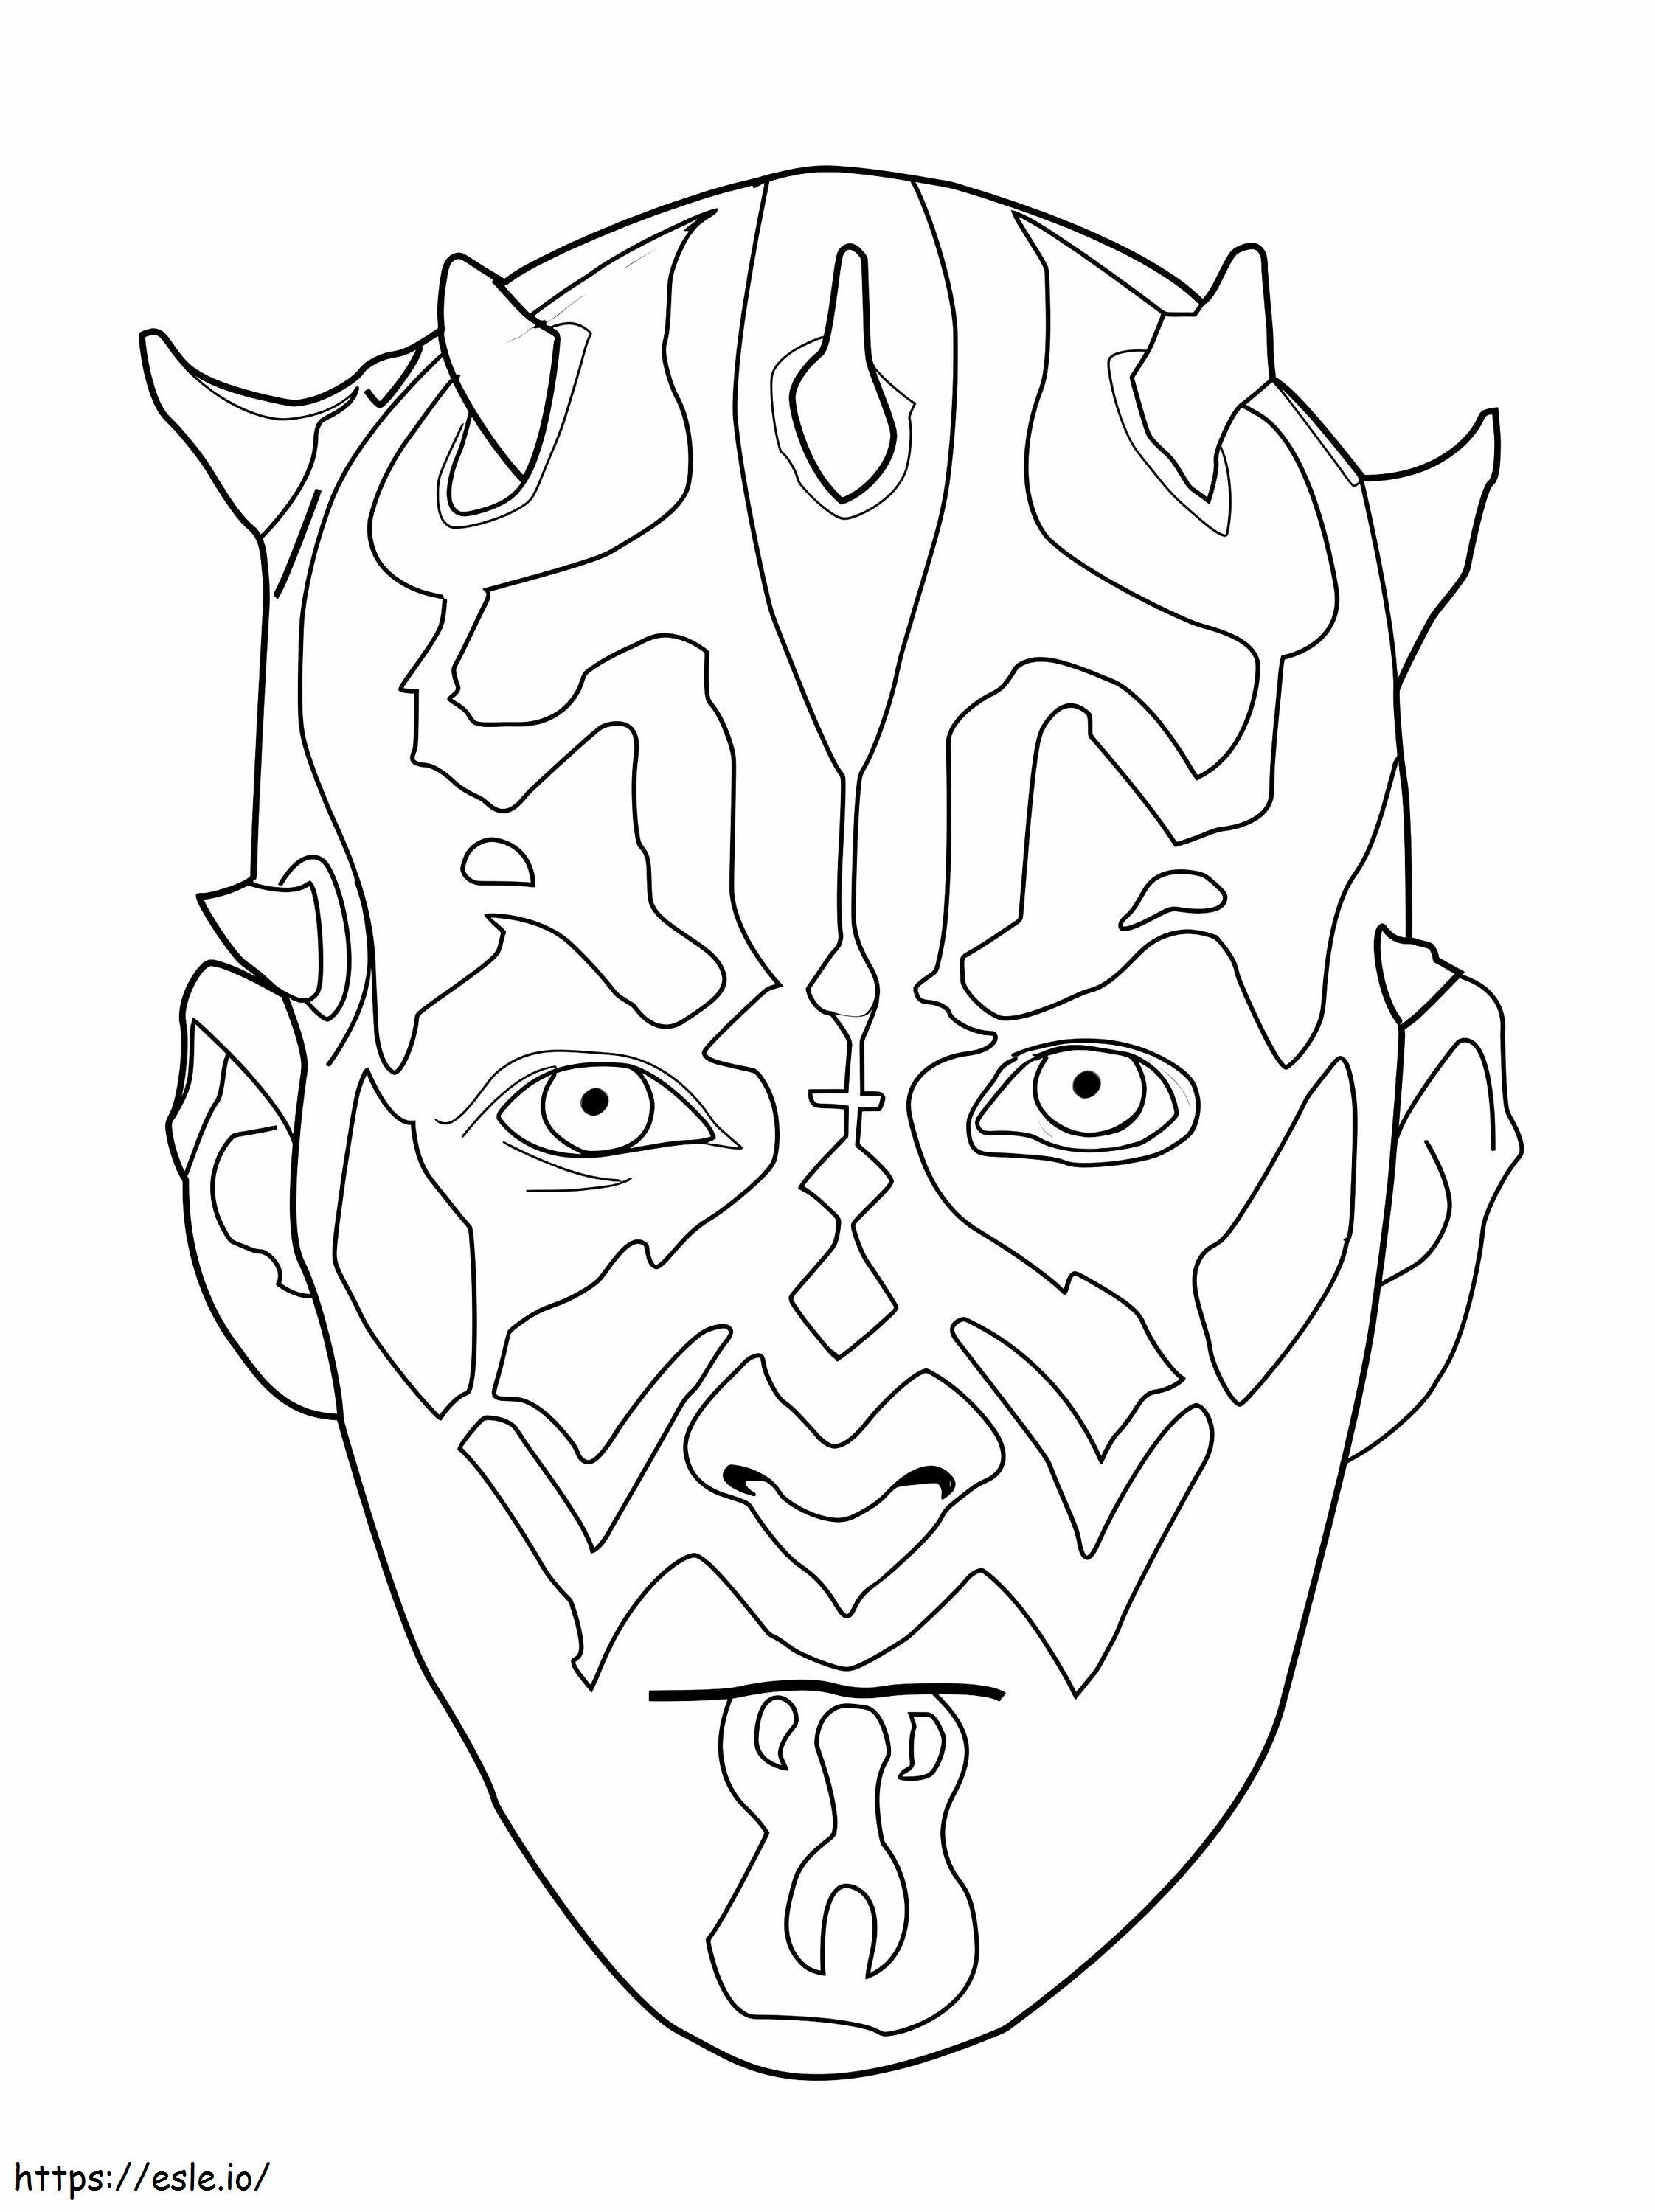 1587977773 131 1317830 Darth Maul Face Templates Star Wars coloring page